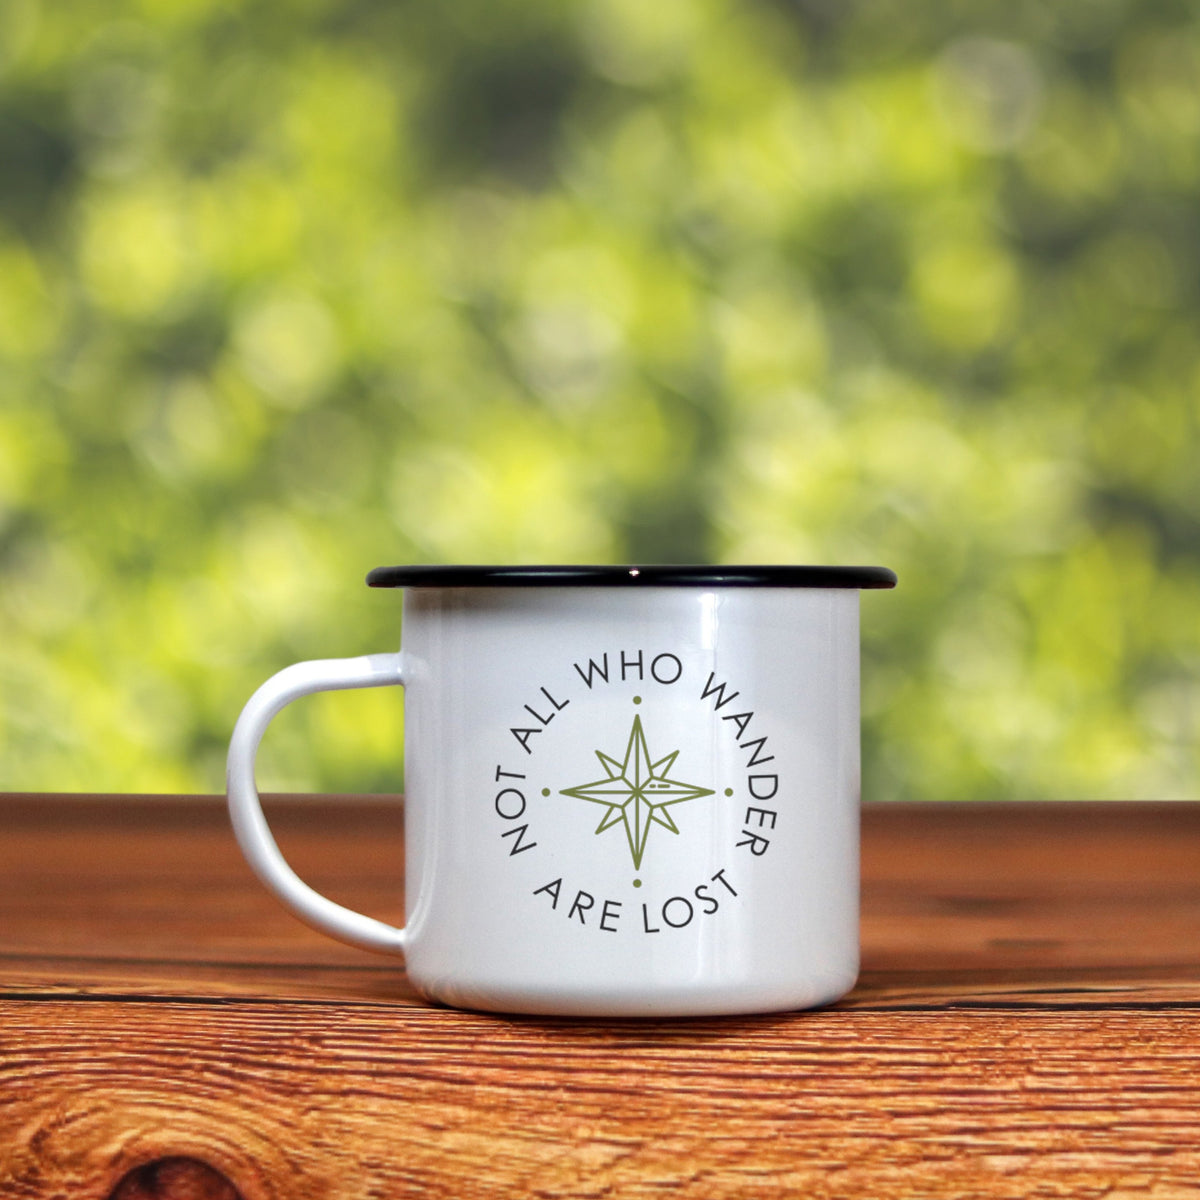 Journo　All　Travel　Compass　Ve　–　Are　Cool　'Not　Wander　Enamel　Mug　Camping　Lost'　Who　The　Goods